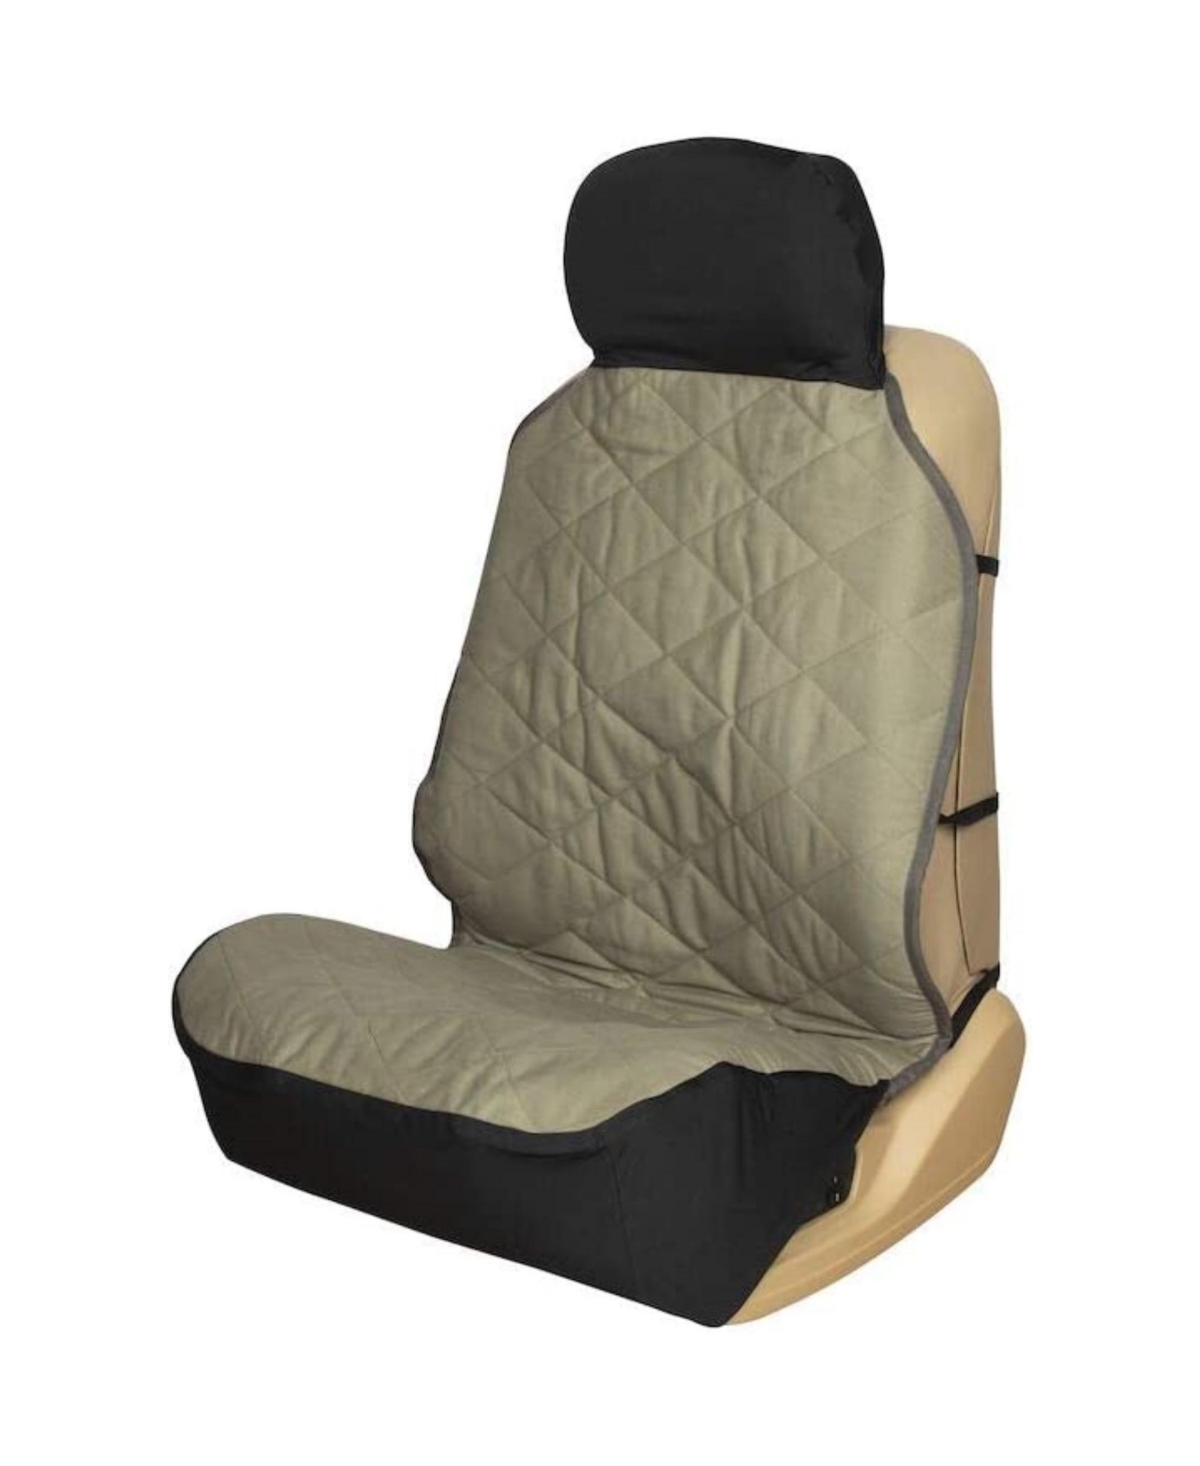 Happy Ride Seat Cover, Waterproof, Fits Most Vehicles - Green